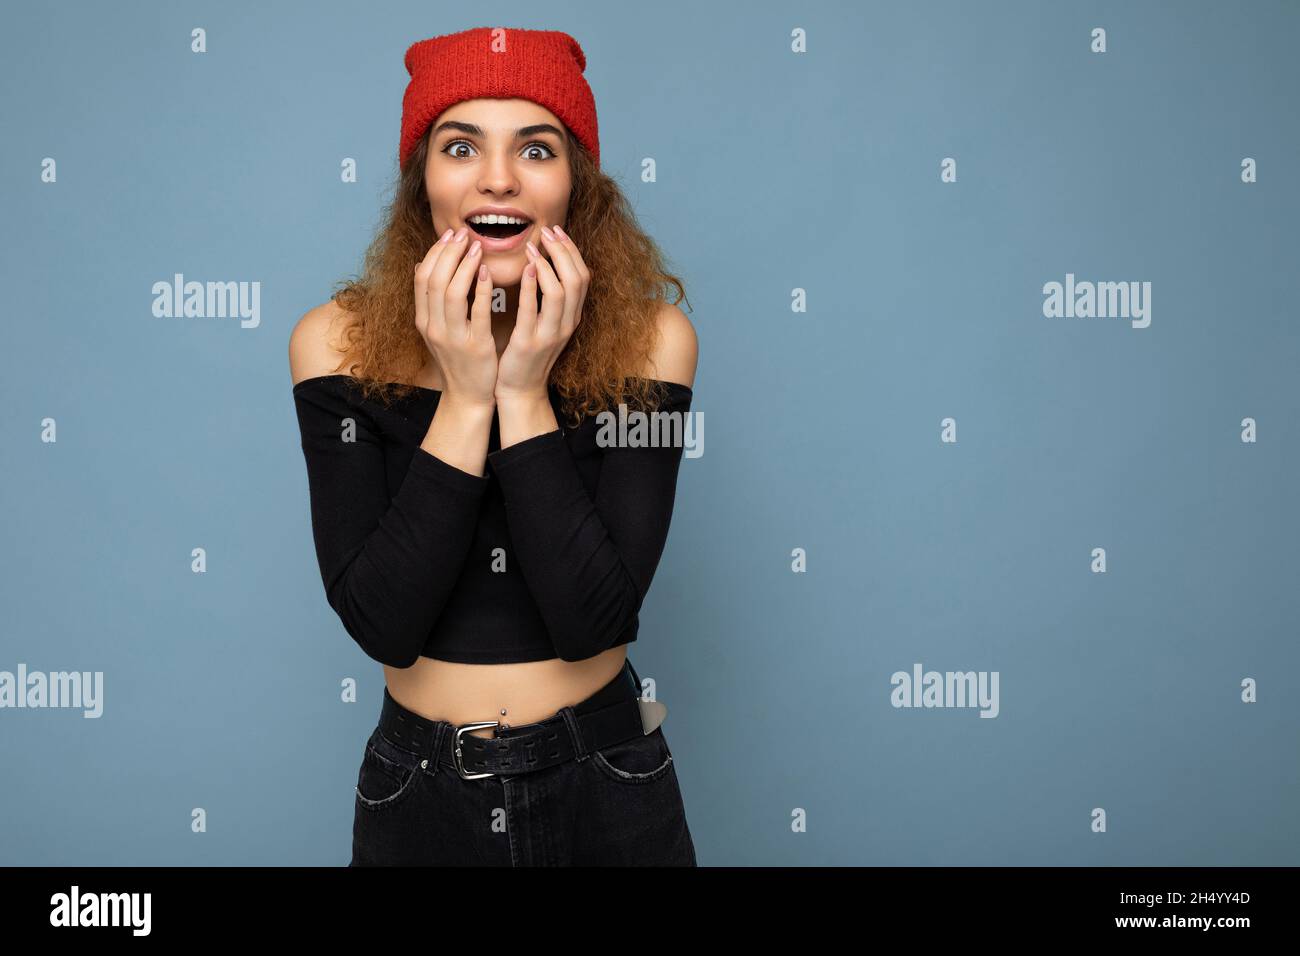 Shot of young emotional shocked amazed nice winsome brunet woman wavy-haired with sincere emotions wearing black crop top and red hat isolated on blue Stock Photo